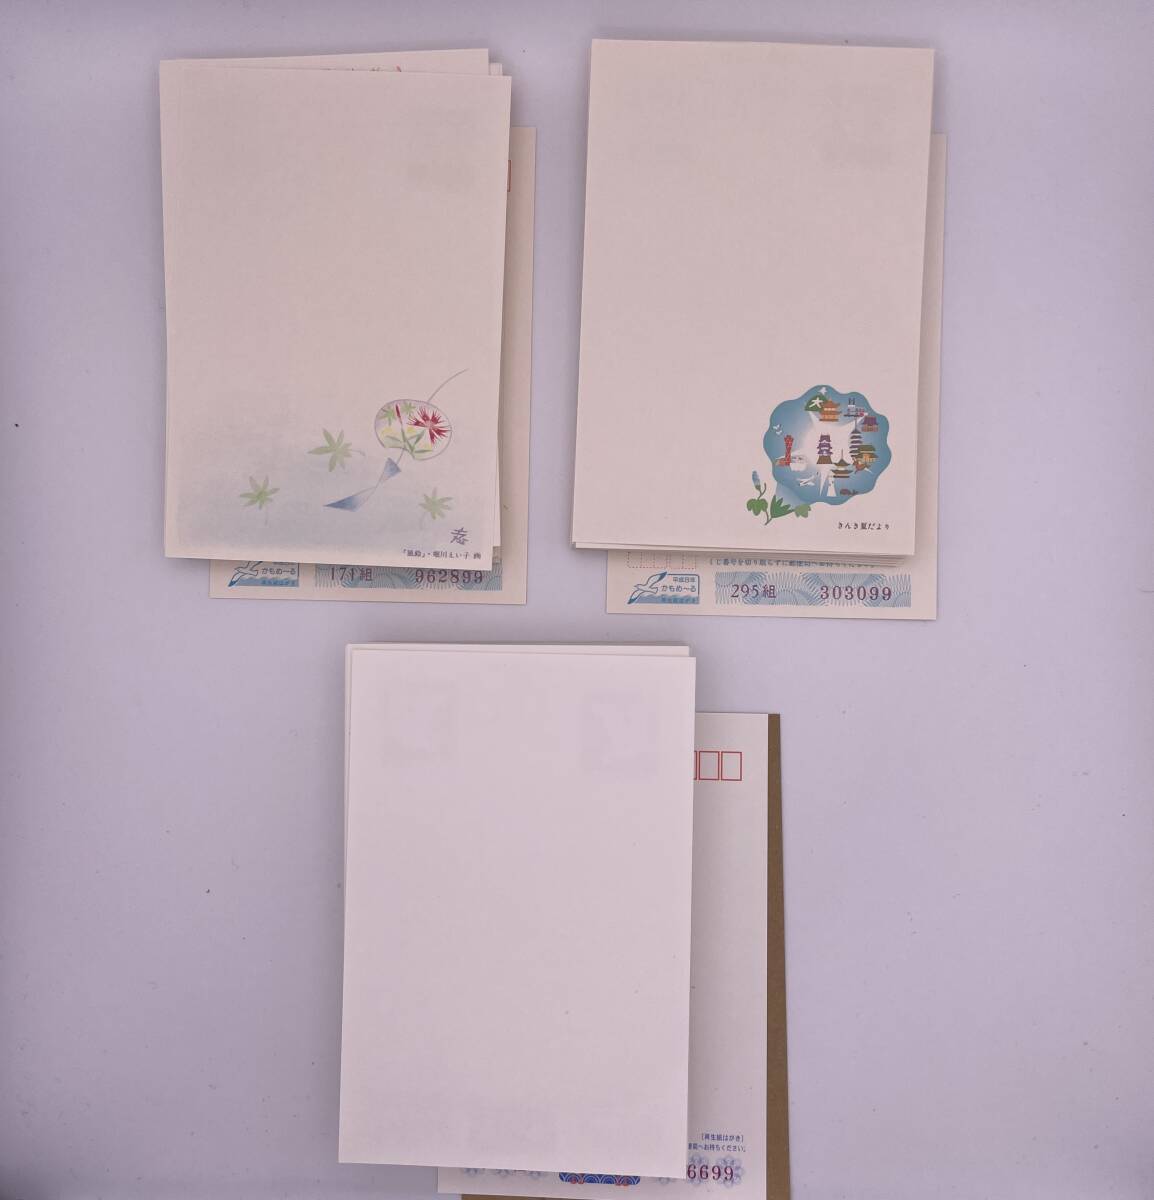  unused postcard total 200 sheets face value 10000 jpy minute reproduction paper ...~. plain * illustration entering mixing 